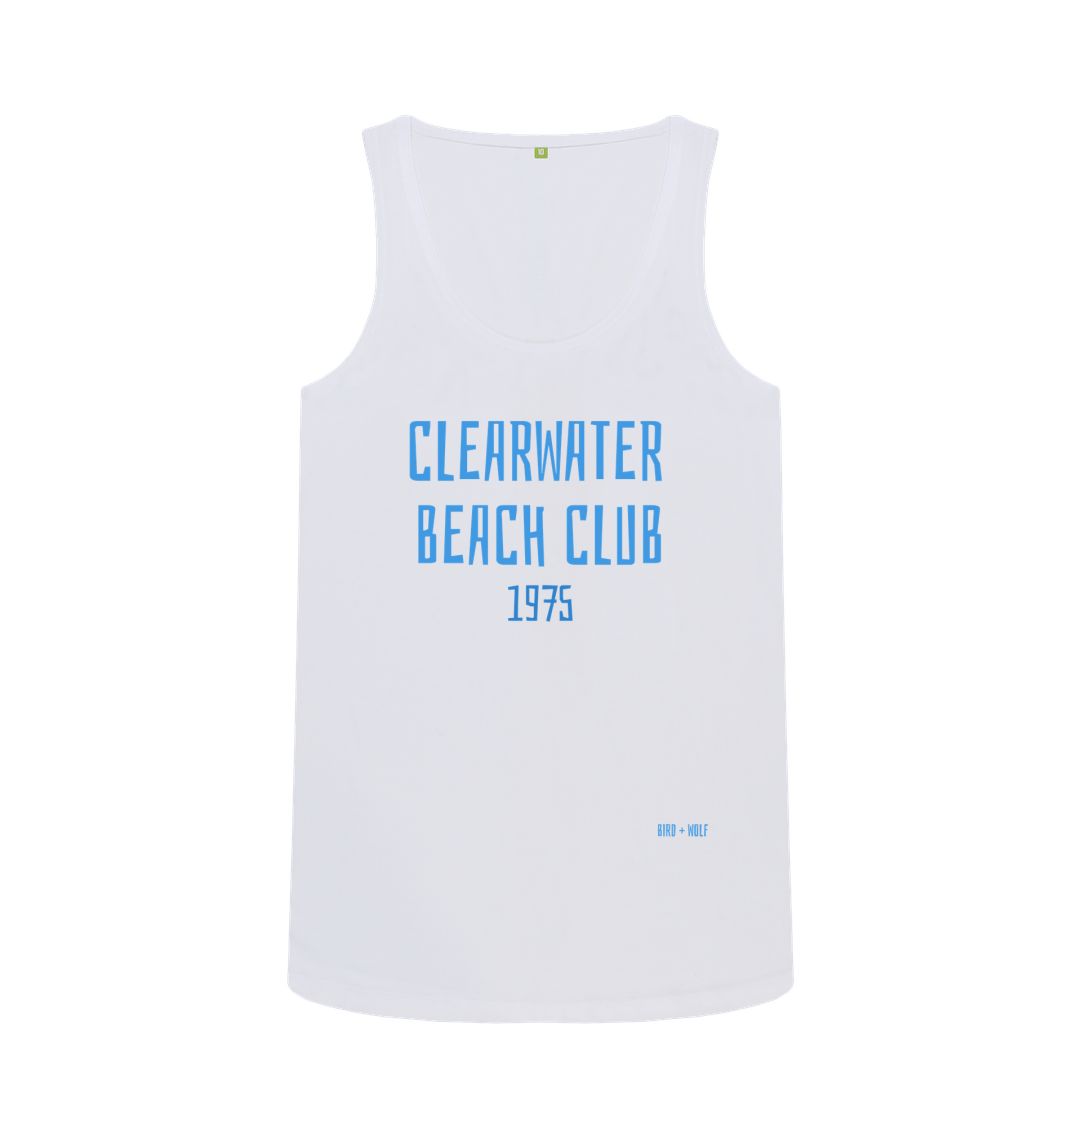 White Clearwater Beach Club 1975 Fitted Vest